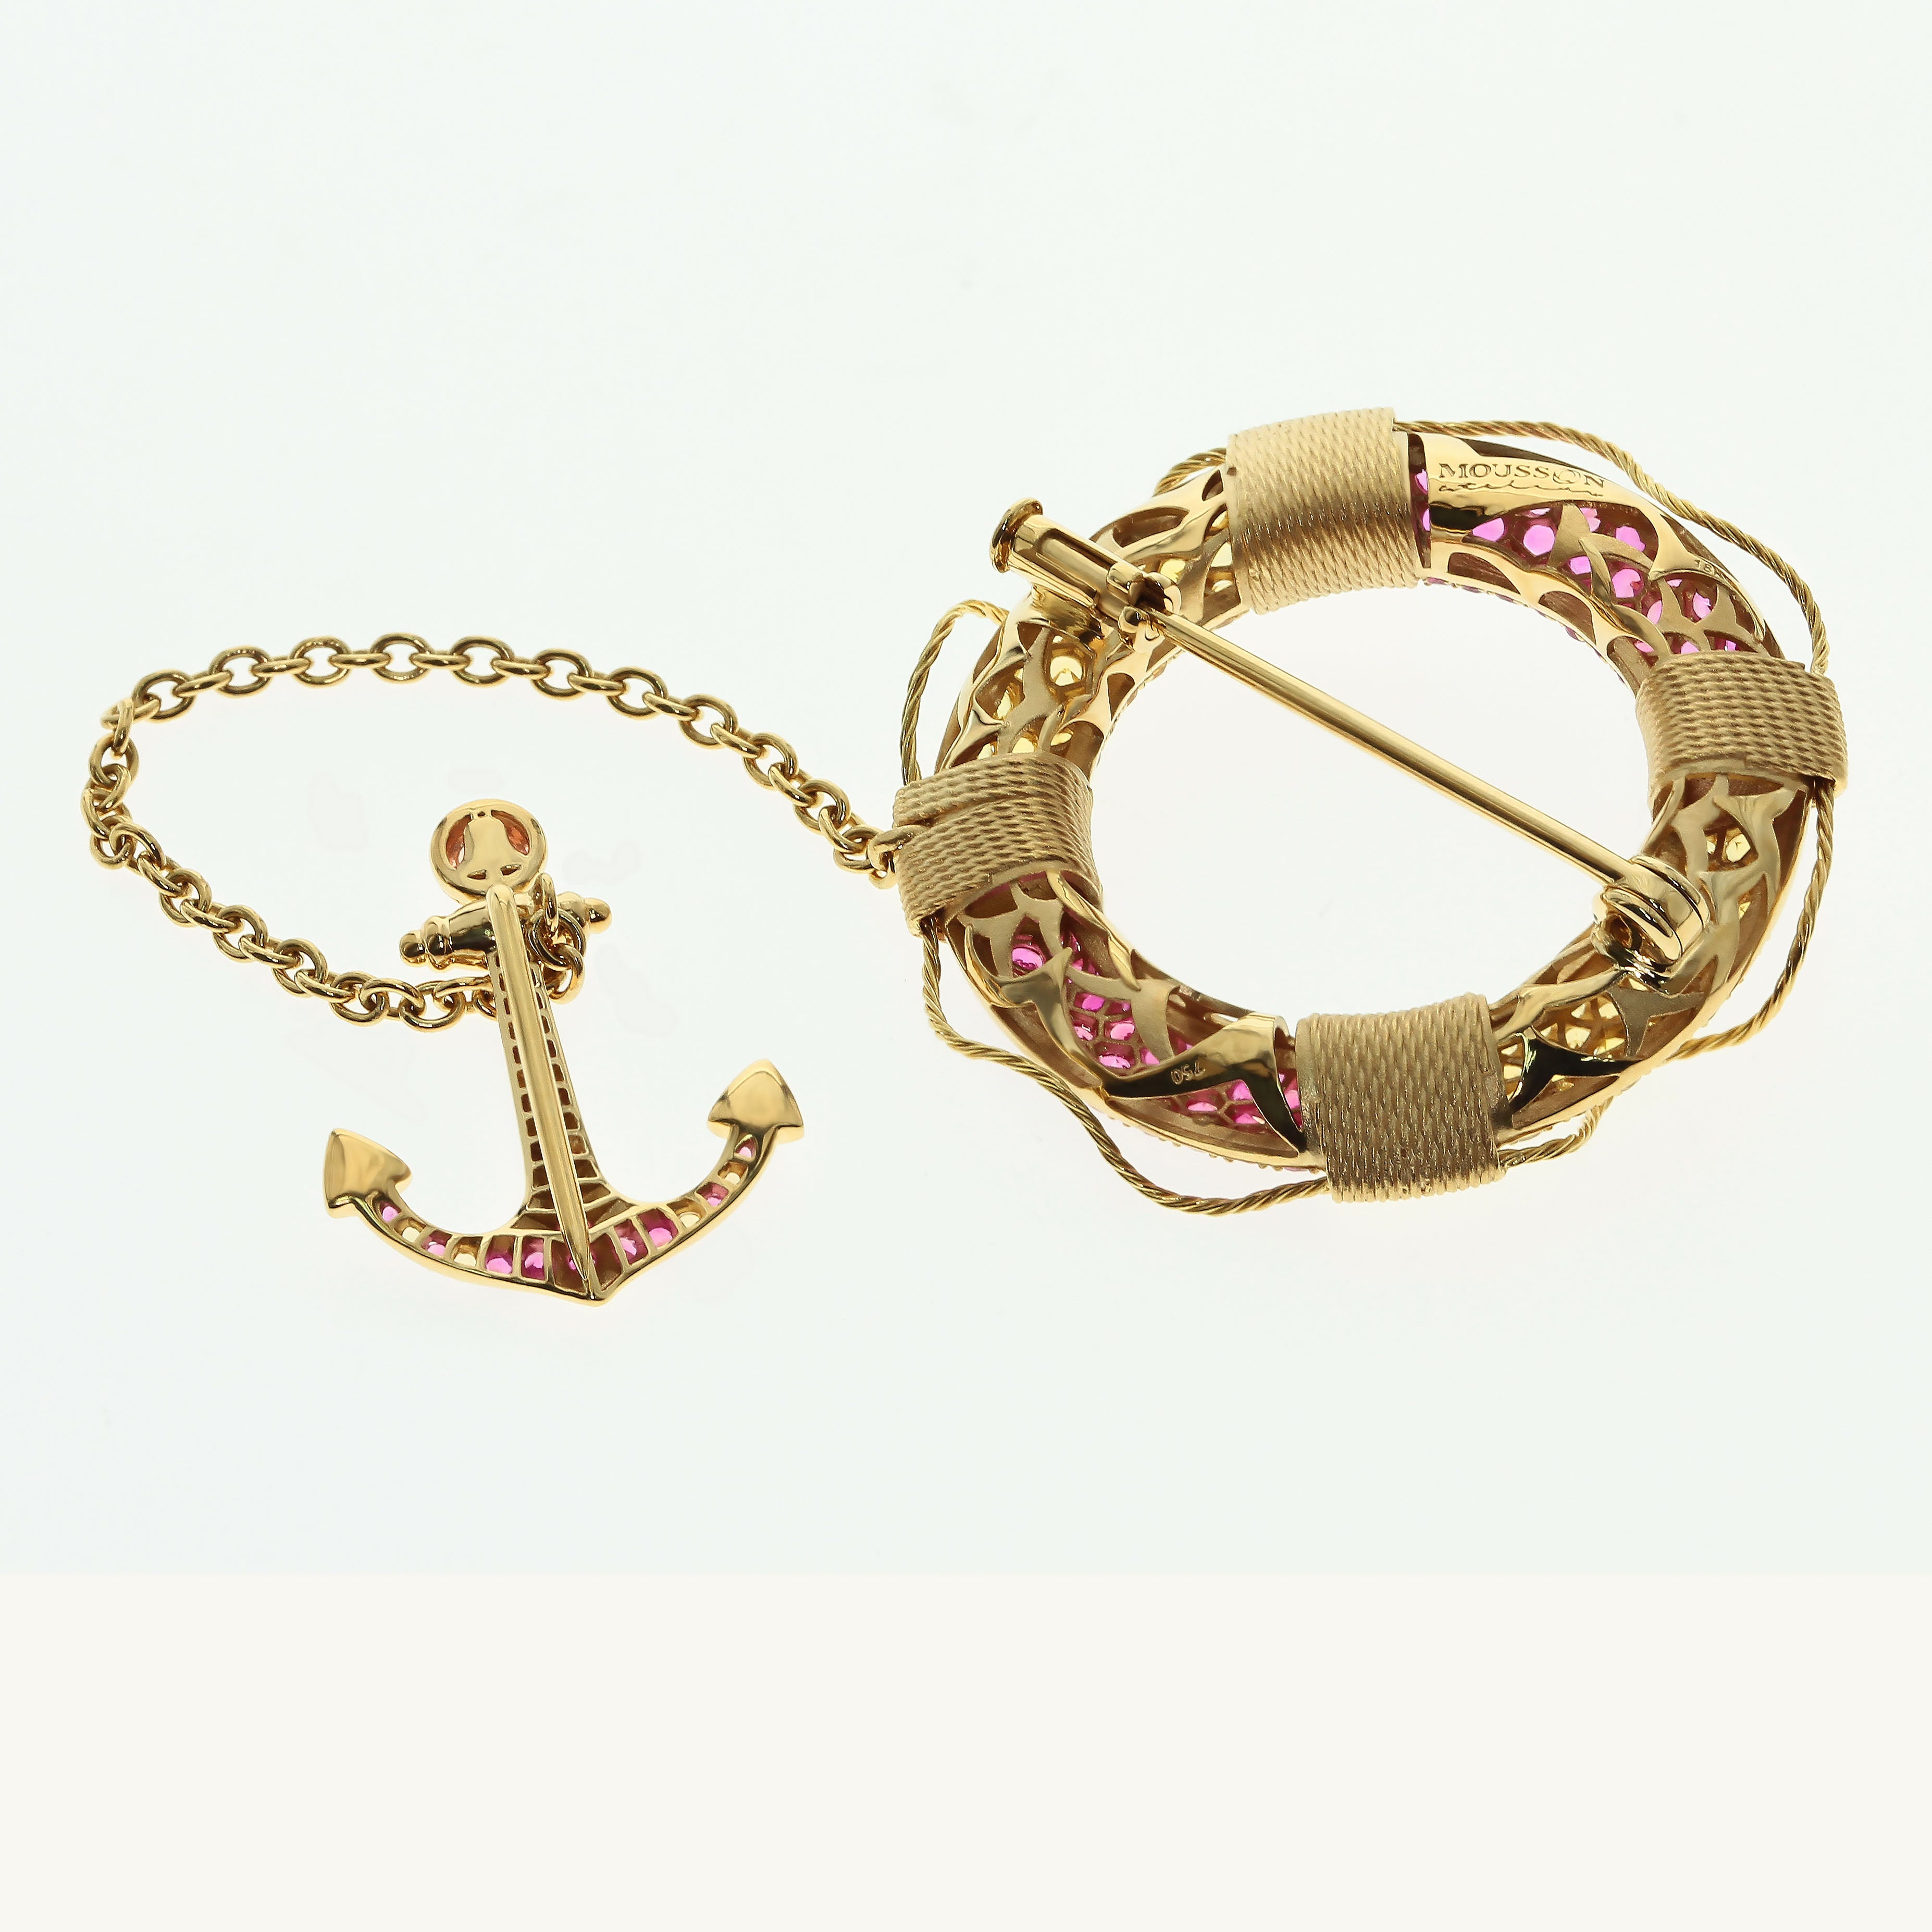 Brs 0293-0, 18K Yellow Gold, Sapphires Lifebuoy Brooch